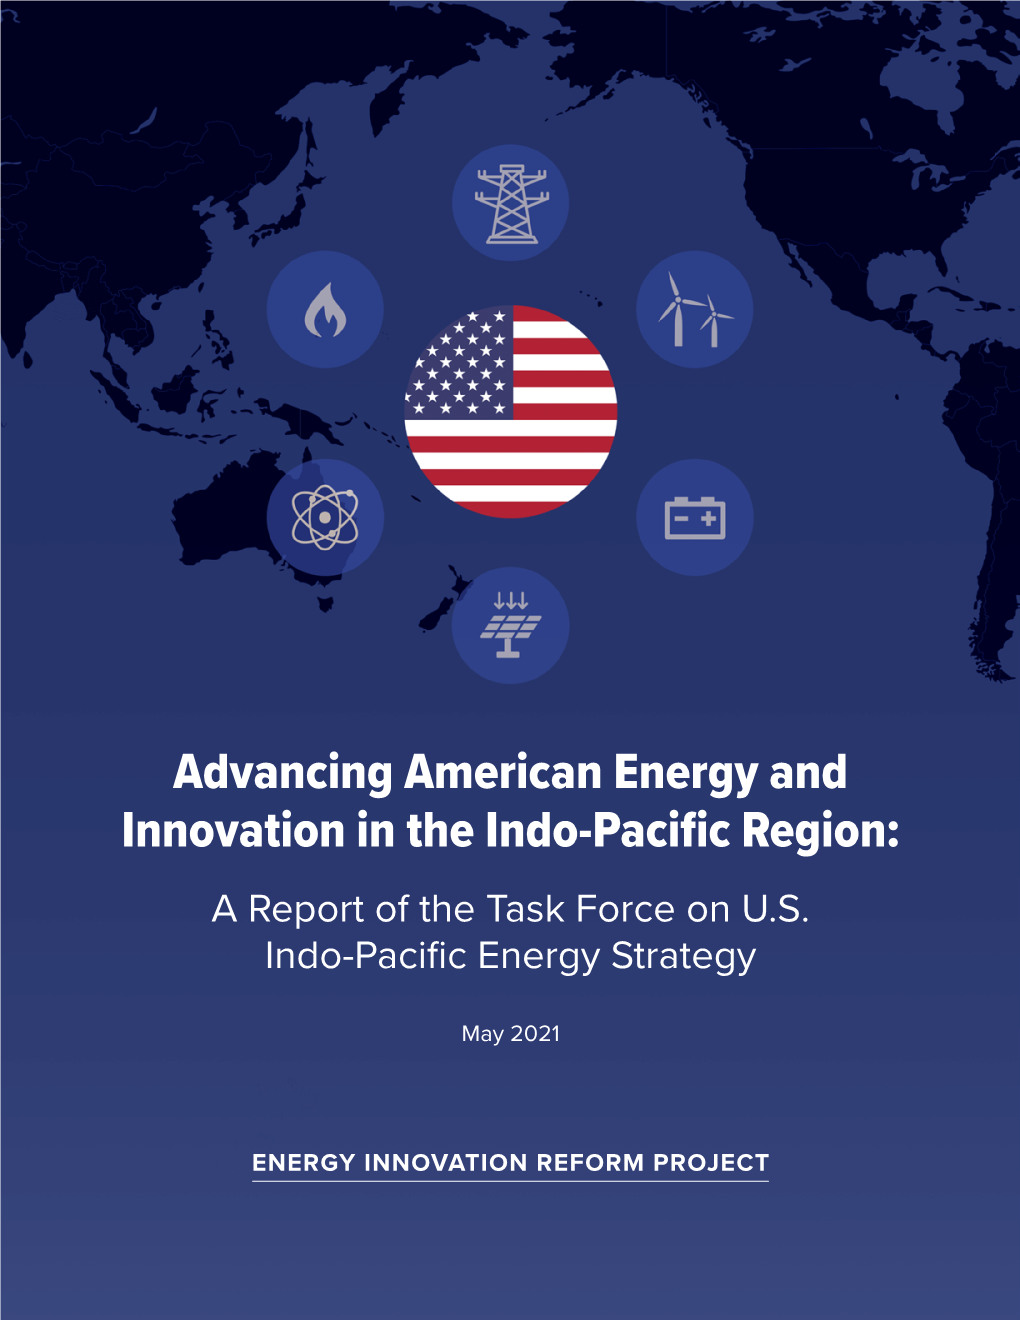 Advancing American Energy and Innovation in the Indo-Pacific Region: a Report of the Task Force on U.S